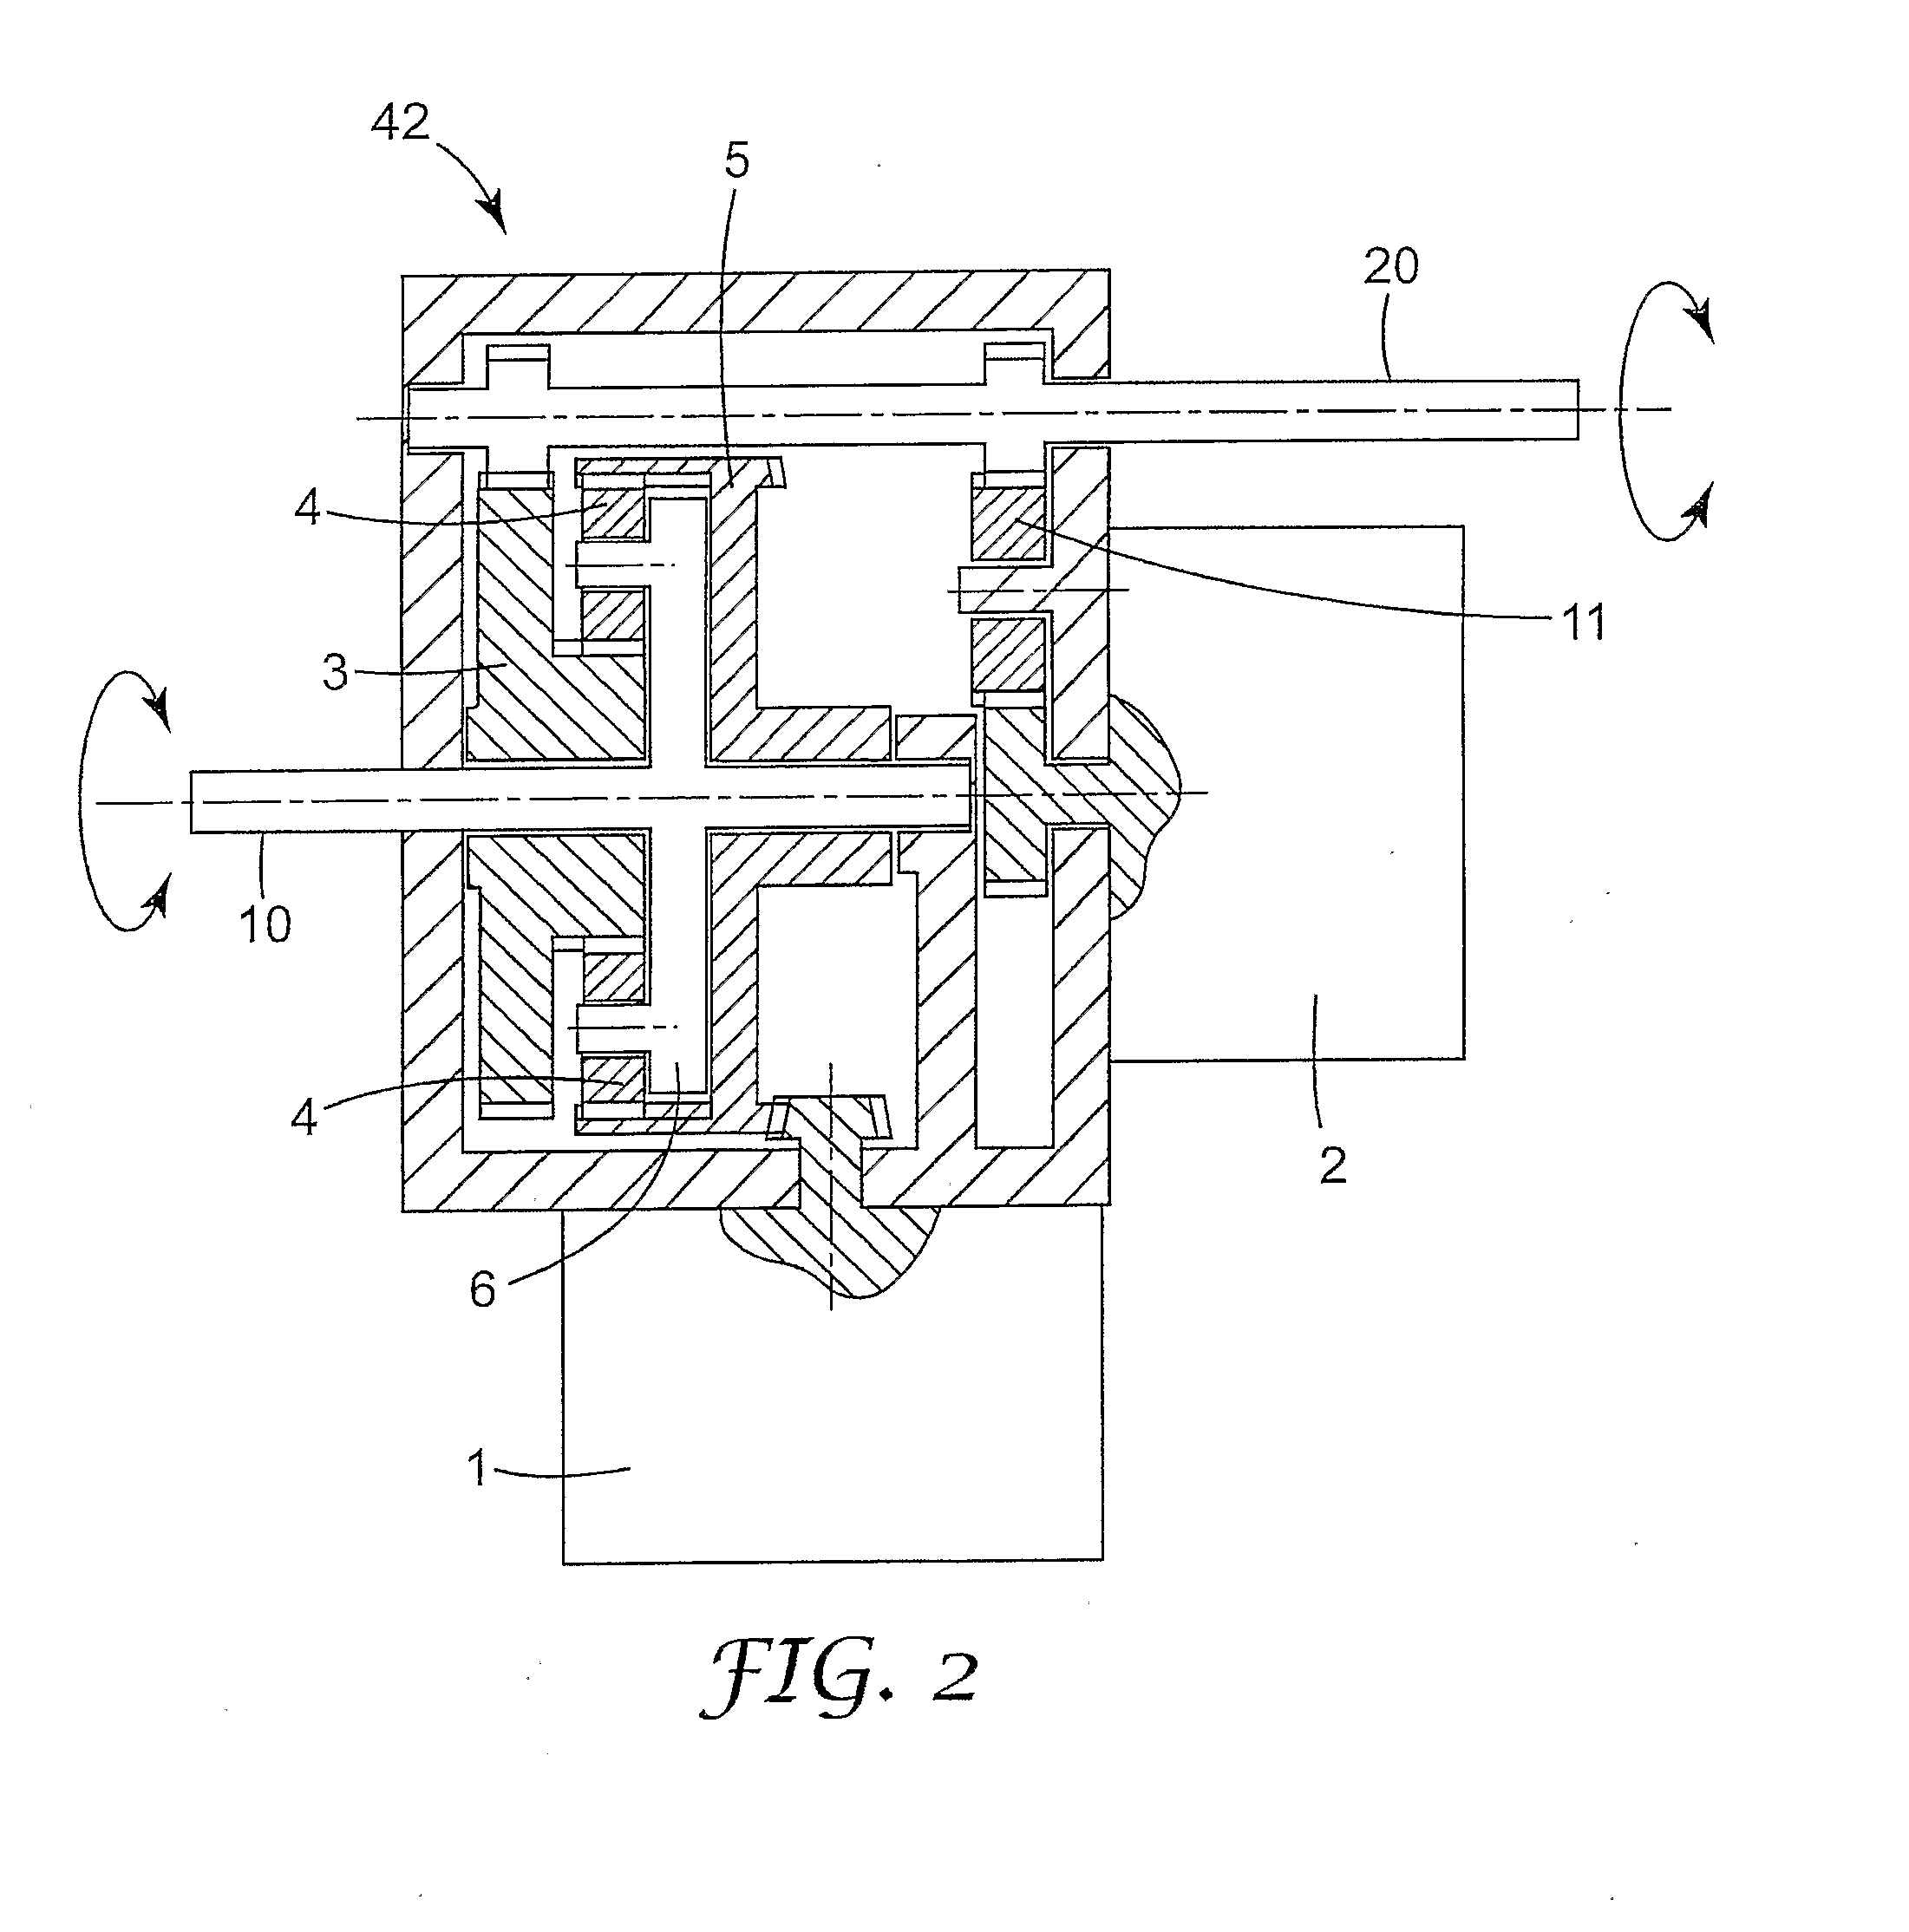 Method of Mixing and Extruding Viscous Materials and Gearbox for Dispensing the Same